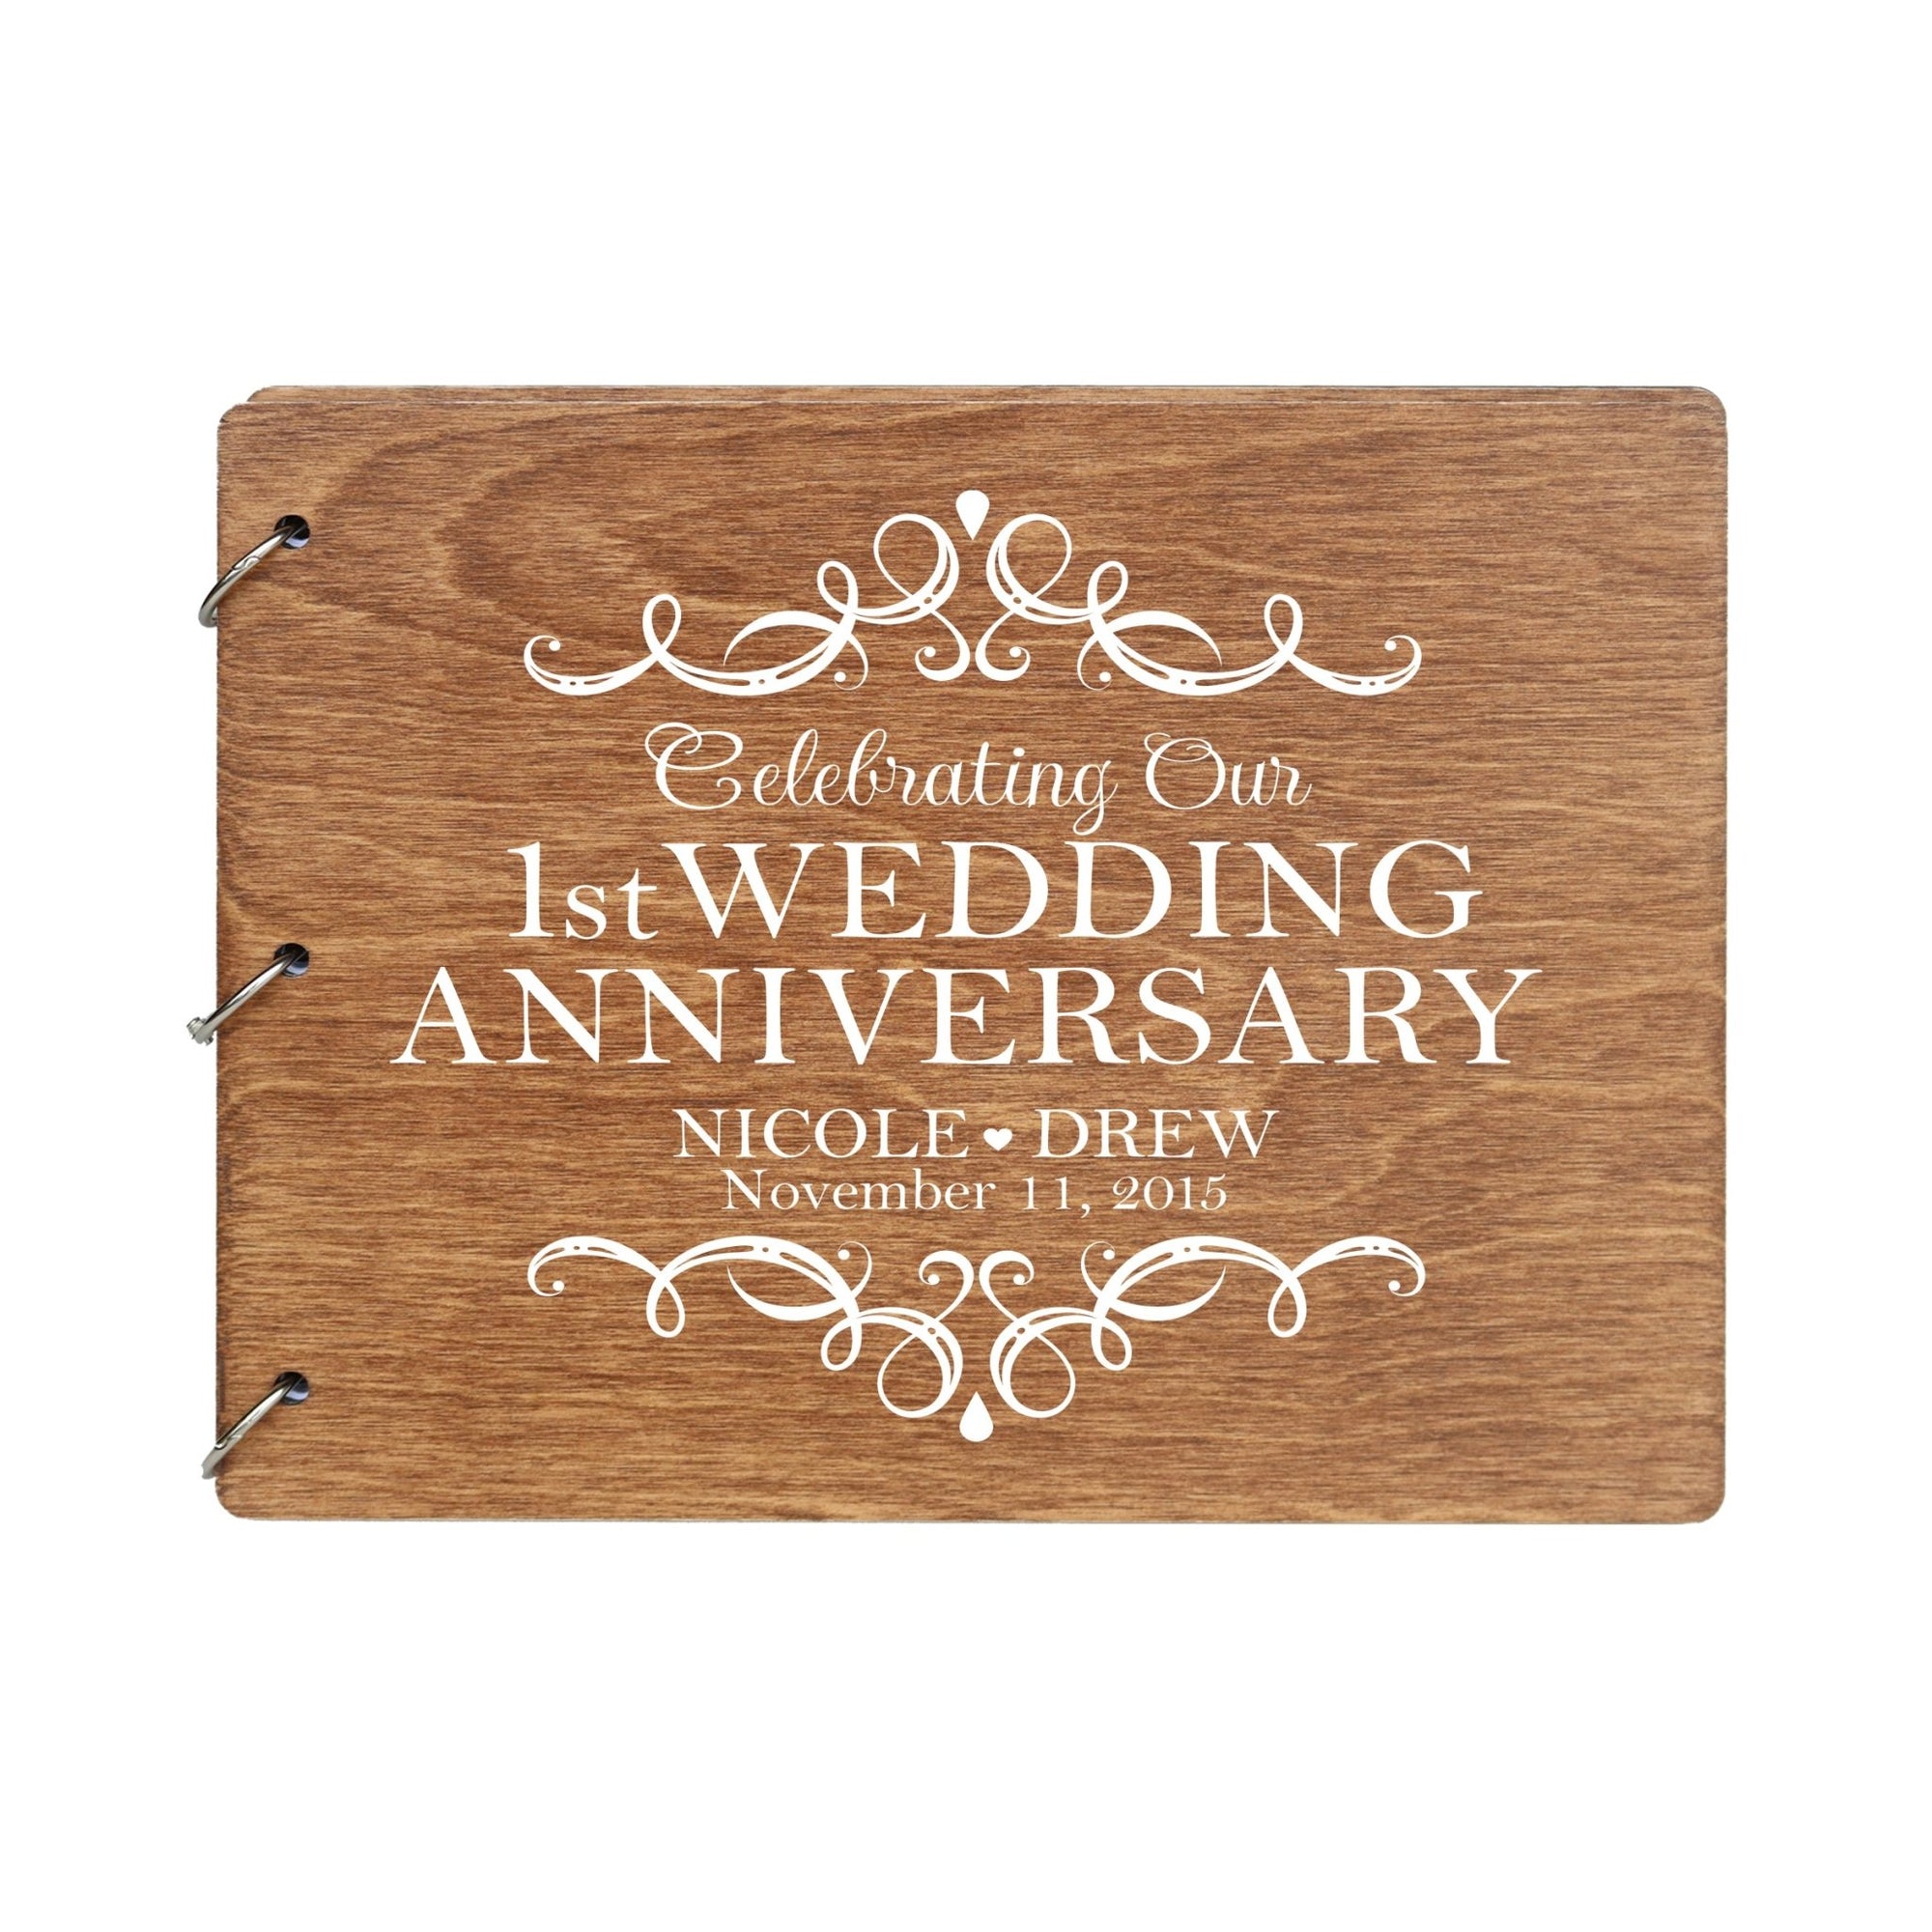 Personalized 1st Wedding Anniversary Guestbook - LifeSong Milestones